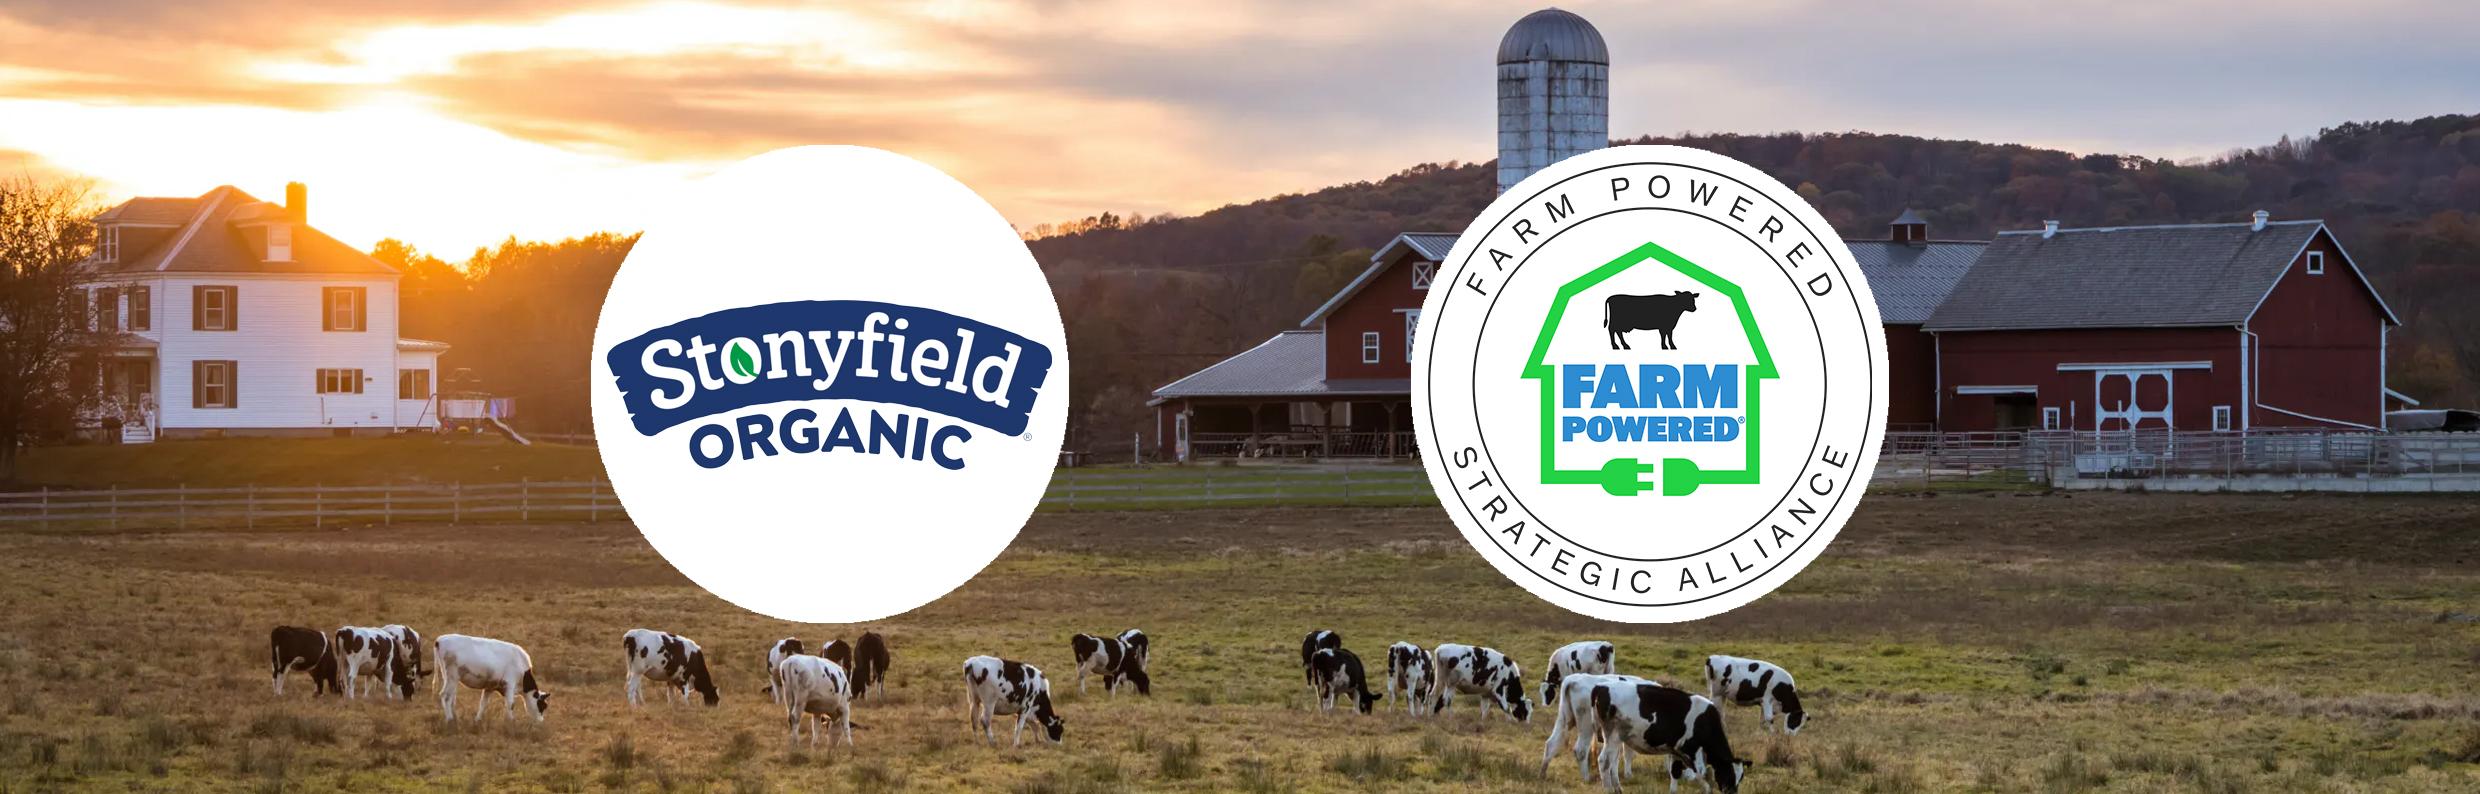 Logos of Stonyfield Organic and Farm Powered Strategic Alliance, with a background image of a farm using anaerobic digestion